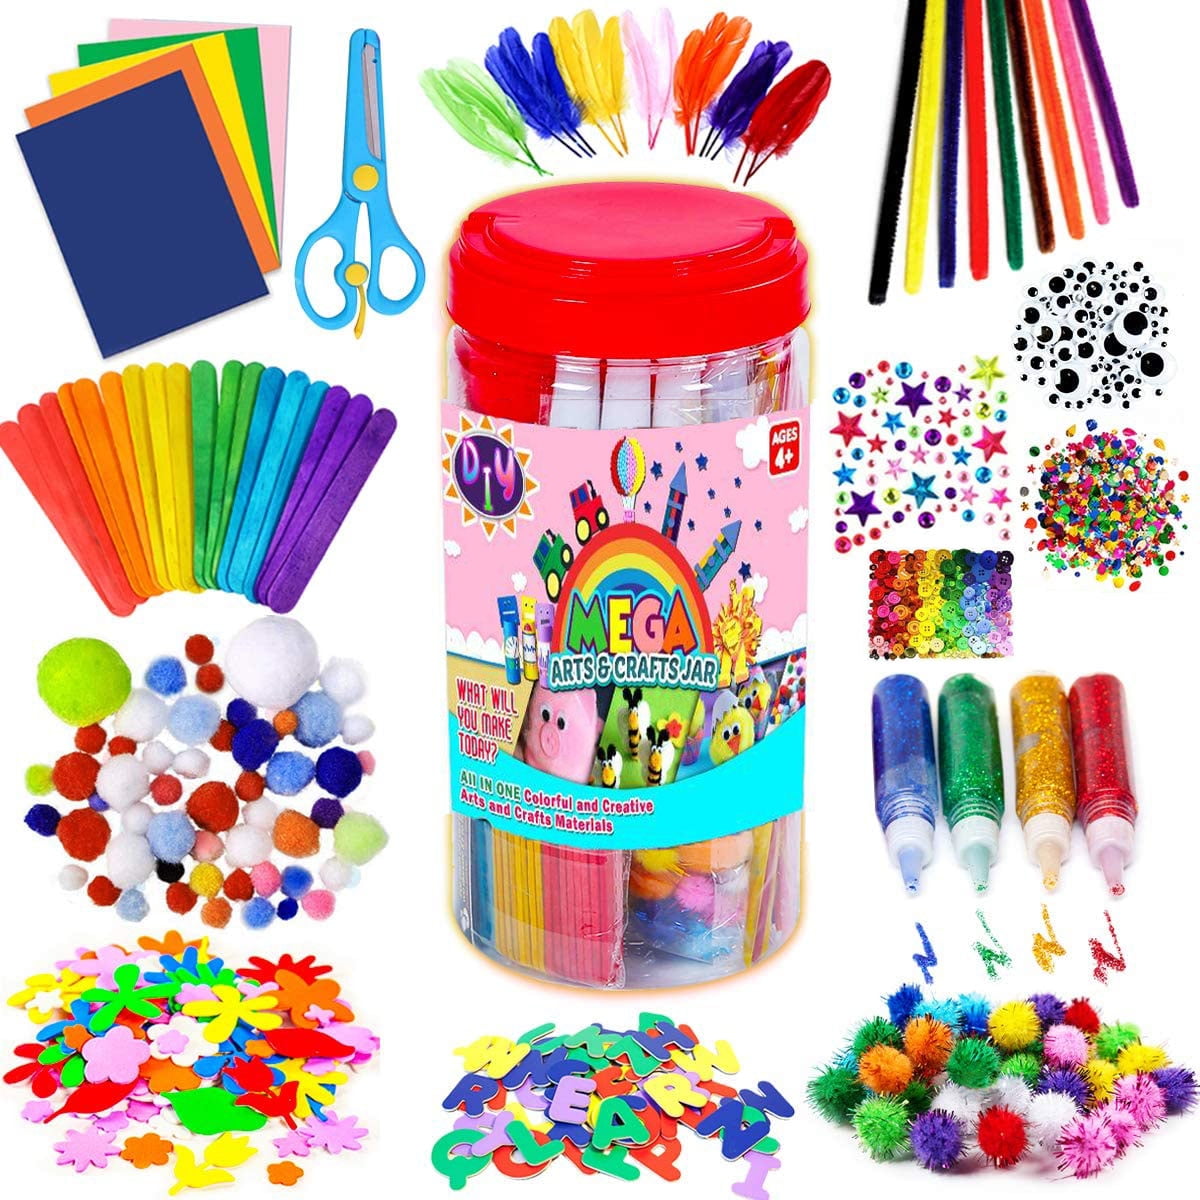 Jumbo Arts & Crafts Kit Suitcase - 2,100+ Pieces Pompoms, Craft Sticks,  Pipe Cleaners, Scissors, & More in Large Craft Box - Art Supplies Set for